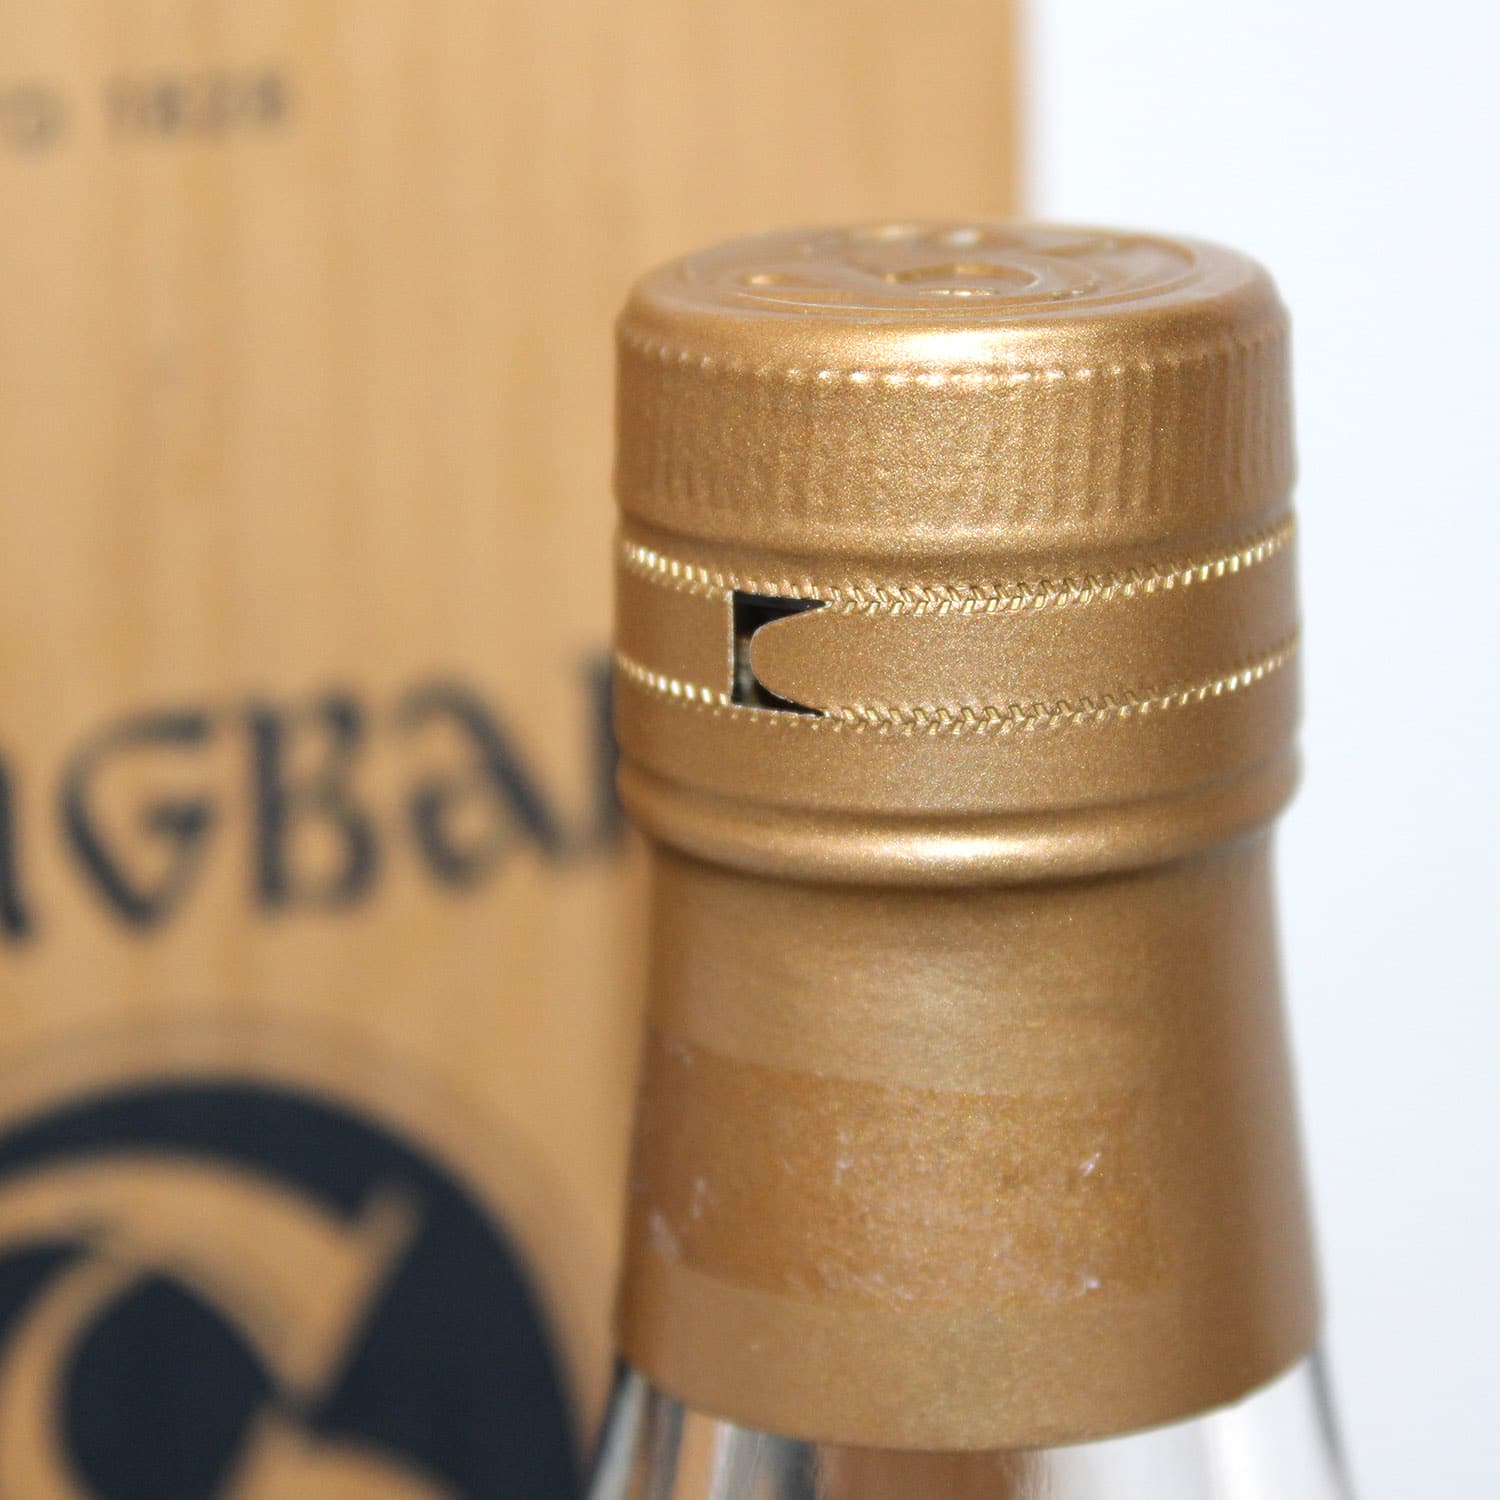 Springbank 30 Year Old 1990s capsule